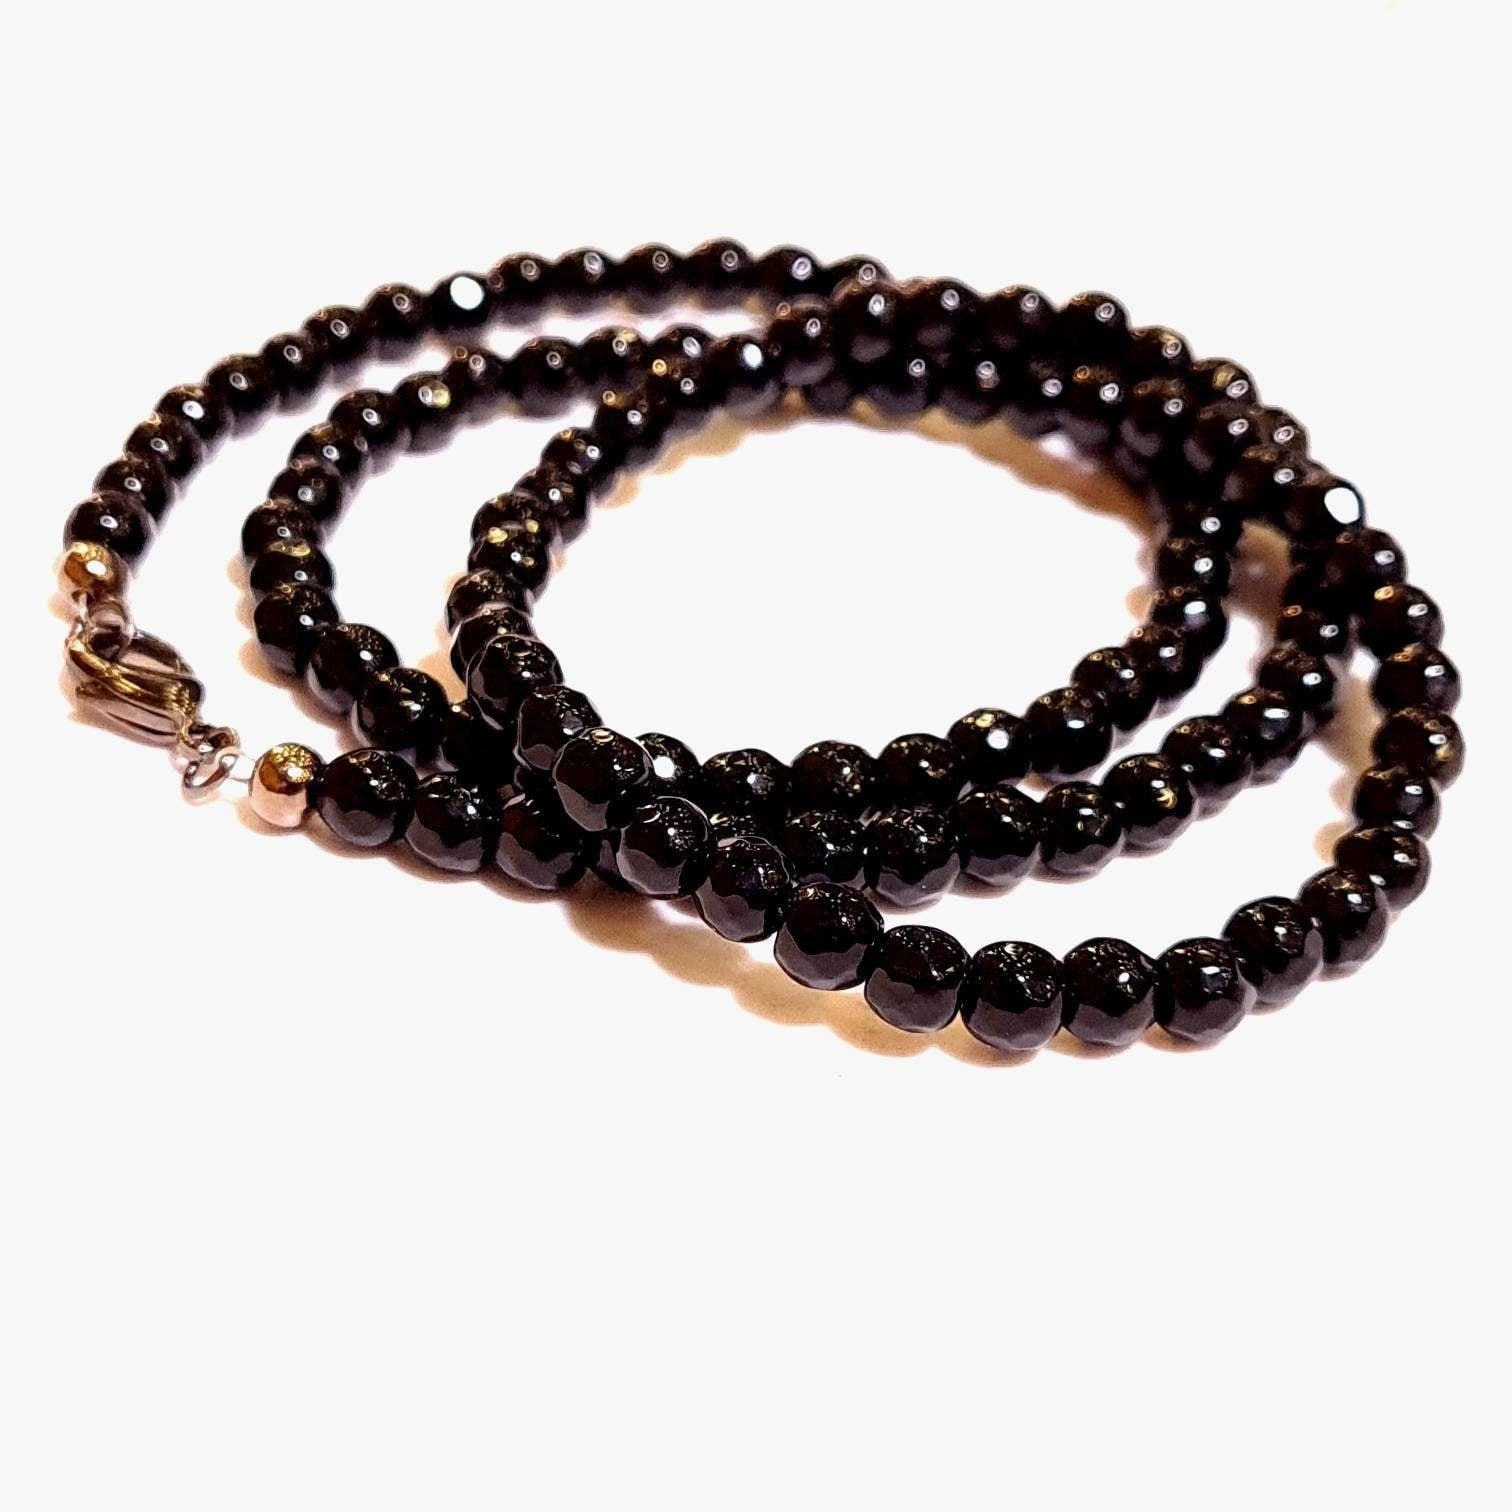 Genuine Black Onyx 6mm Faceted Round AAA quality beaded handmade Necklace. elegant Men and women gift